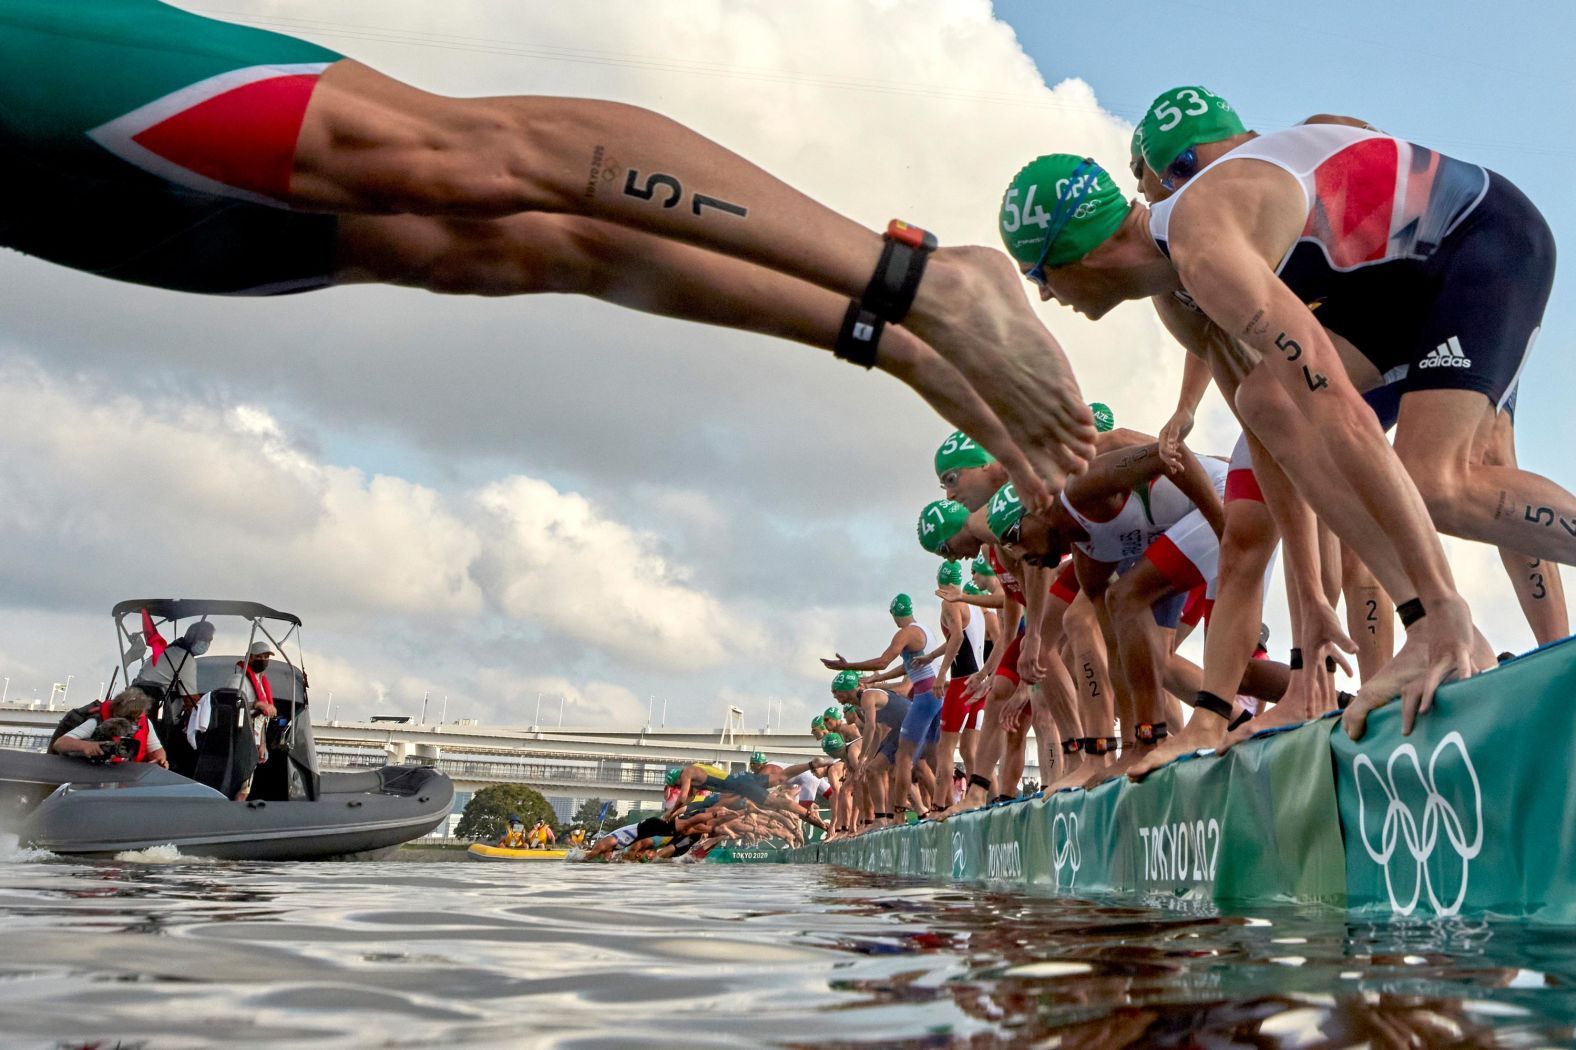 Athletes dive into the water at the start of the men's triathlon on July 26. A broadcast boat prevented all swimmers from starting, <a href="index.php?page=&url=https%3A%2F%2Fwww.nbcolympics.com%2Fnews%2Fmens-triathlon-kicks-bizarre-false-start-first-olympic-history" target="_blank" target="_blank">forcing a restart.</a> It was the first-ever call of its kind in an Olympic triathlon.